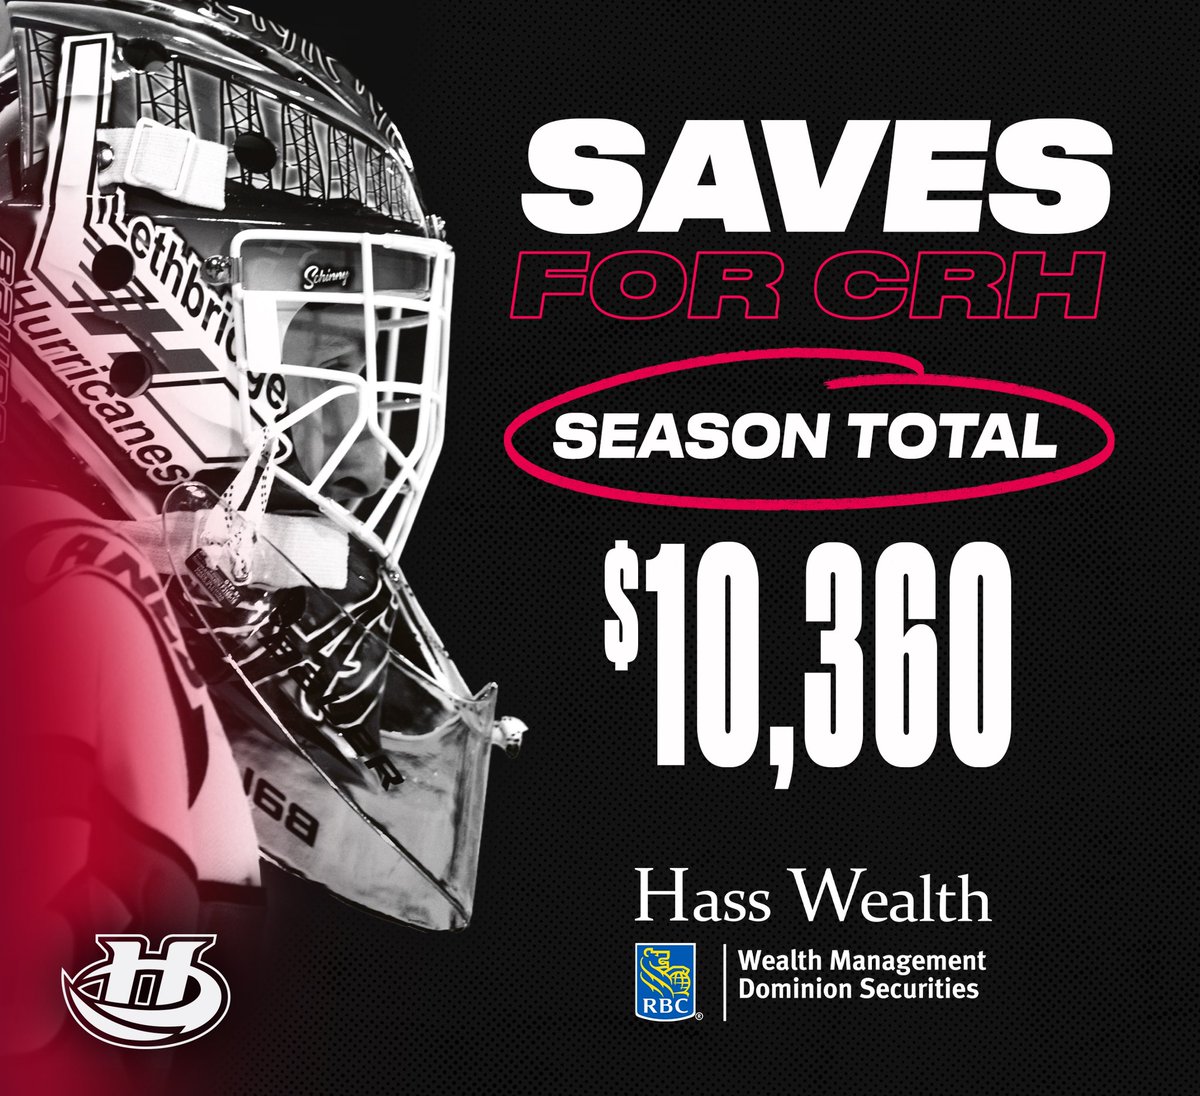 This season, Harry & Smitty combined for a total of 1,036 saves concluding our Saves for CRH Campaign. Hass Wealth of RBC Dominion Securities will donate $10,360 to the Chinook Regional Hospital. Thanks to Dustin, a member of Hass Wealth, and his son Cooper for stopping by! #YQL